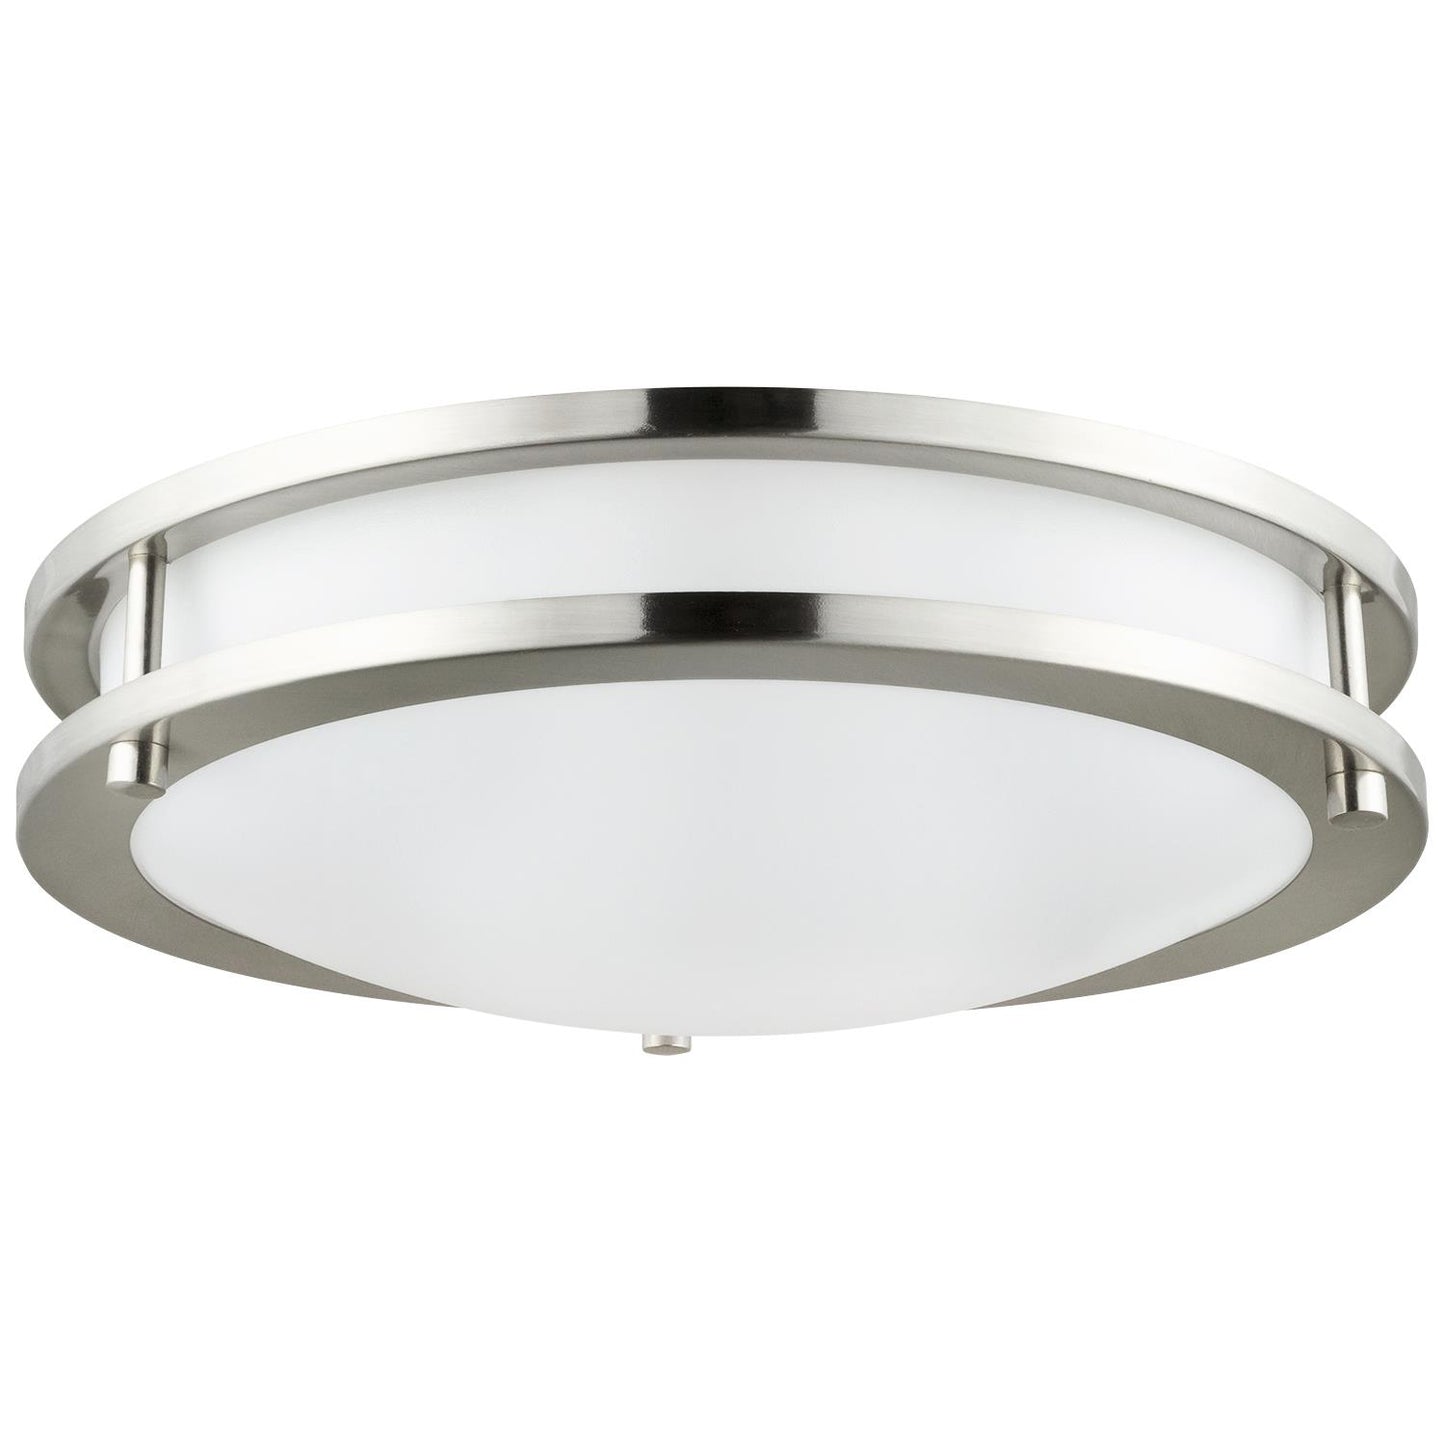 Sunlite 88315-SU LED Flush Mount Double Band Ceiling Fixture, 15 Watt, Dimmable, Brushed Nickel Finish, 12-Inch 40K - Cool White